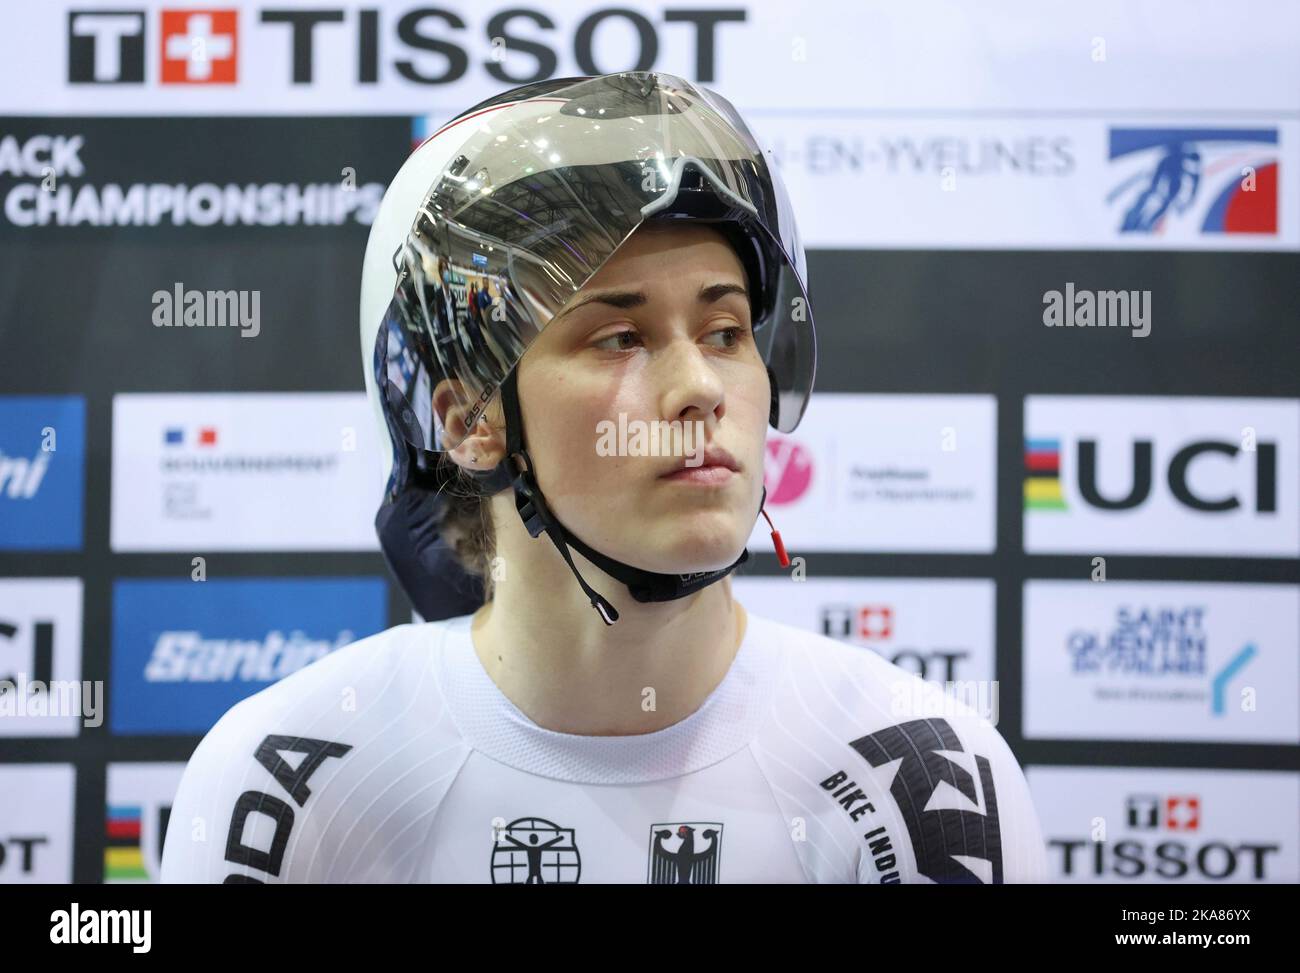 Pauline Grabosch from Germany at the 2022 UCI Track Cycling World Championships in Saint-Quentin-en-Yvelines (France). Stock Photo